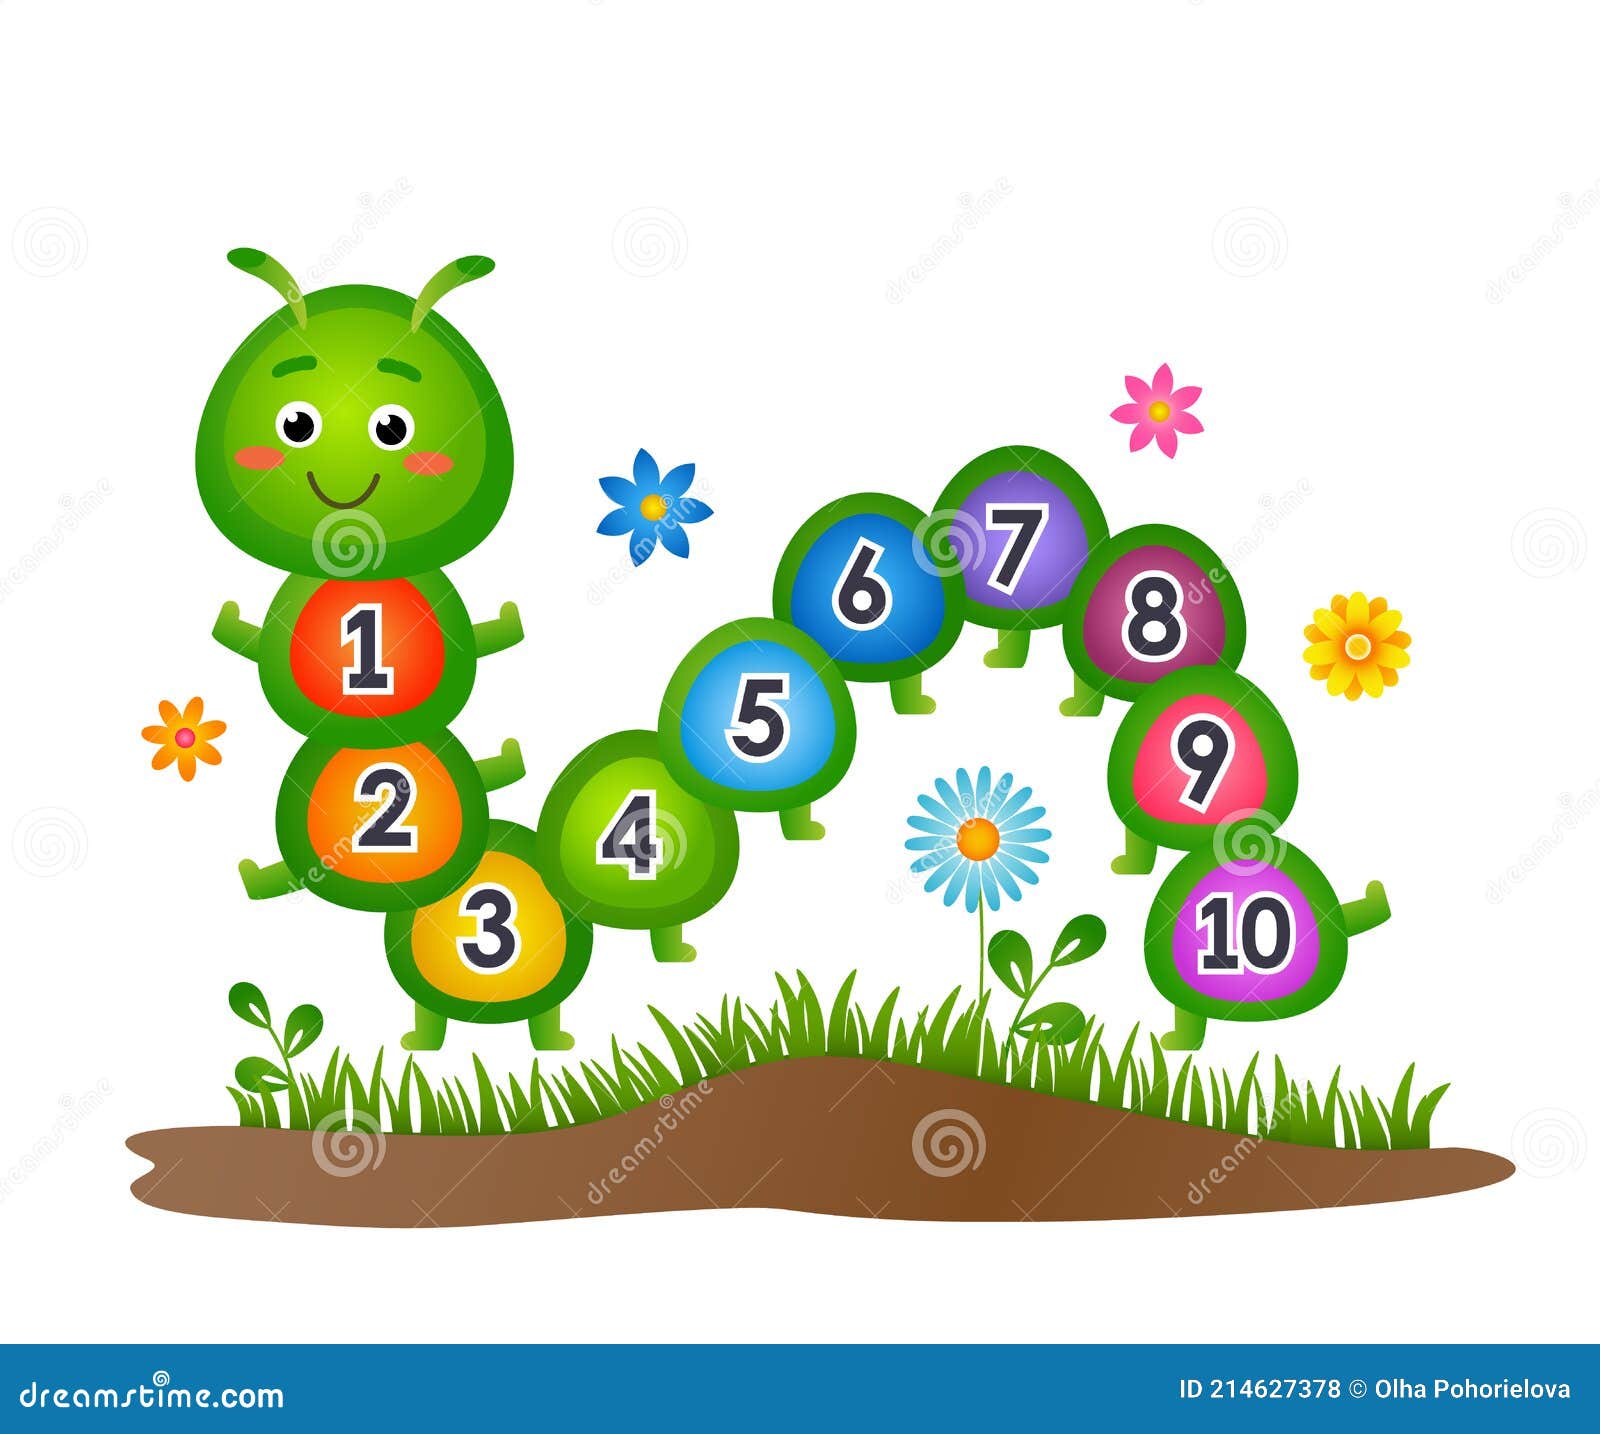 https://thumbs.dreamstime.com/z/child-study-allowance-counting-up-to-cute-caterpillar-numbers-vector-illustration-isolated-white-background-214627378.jpg